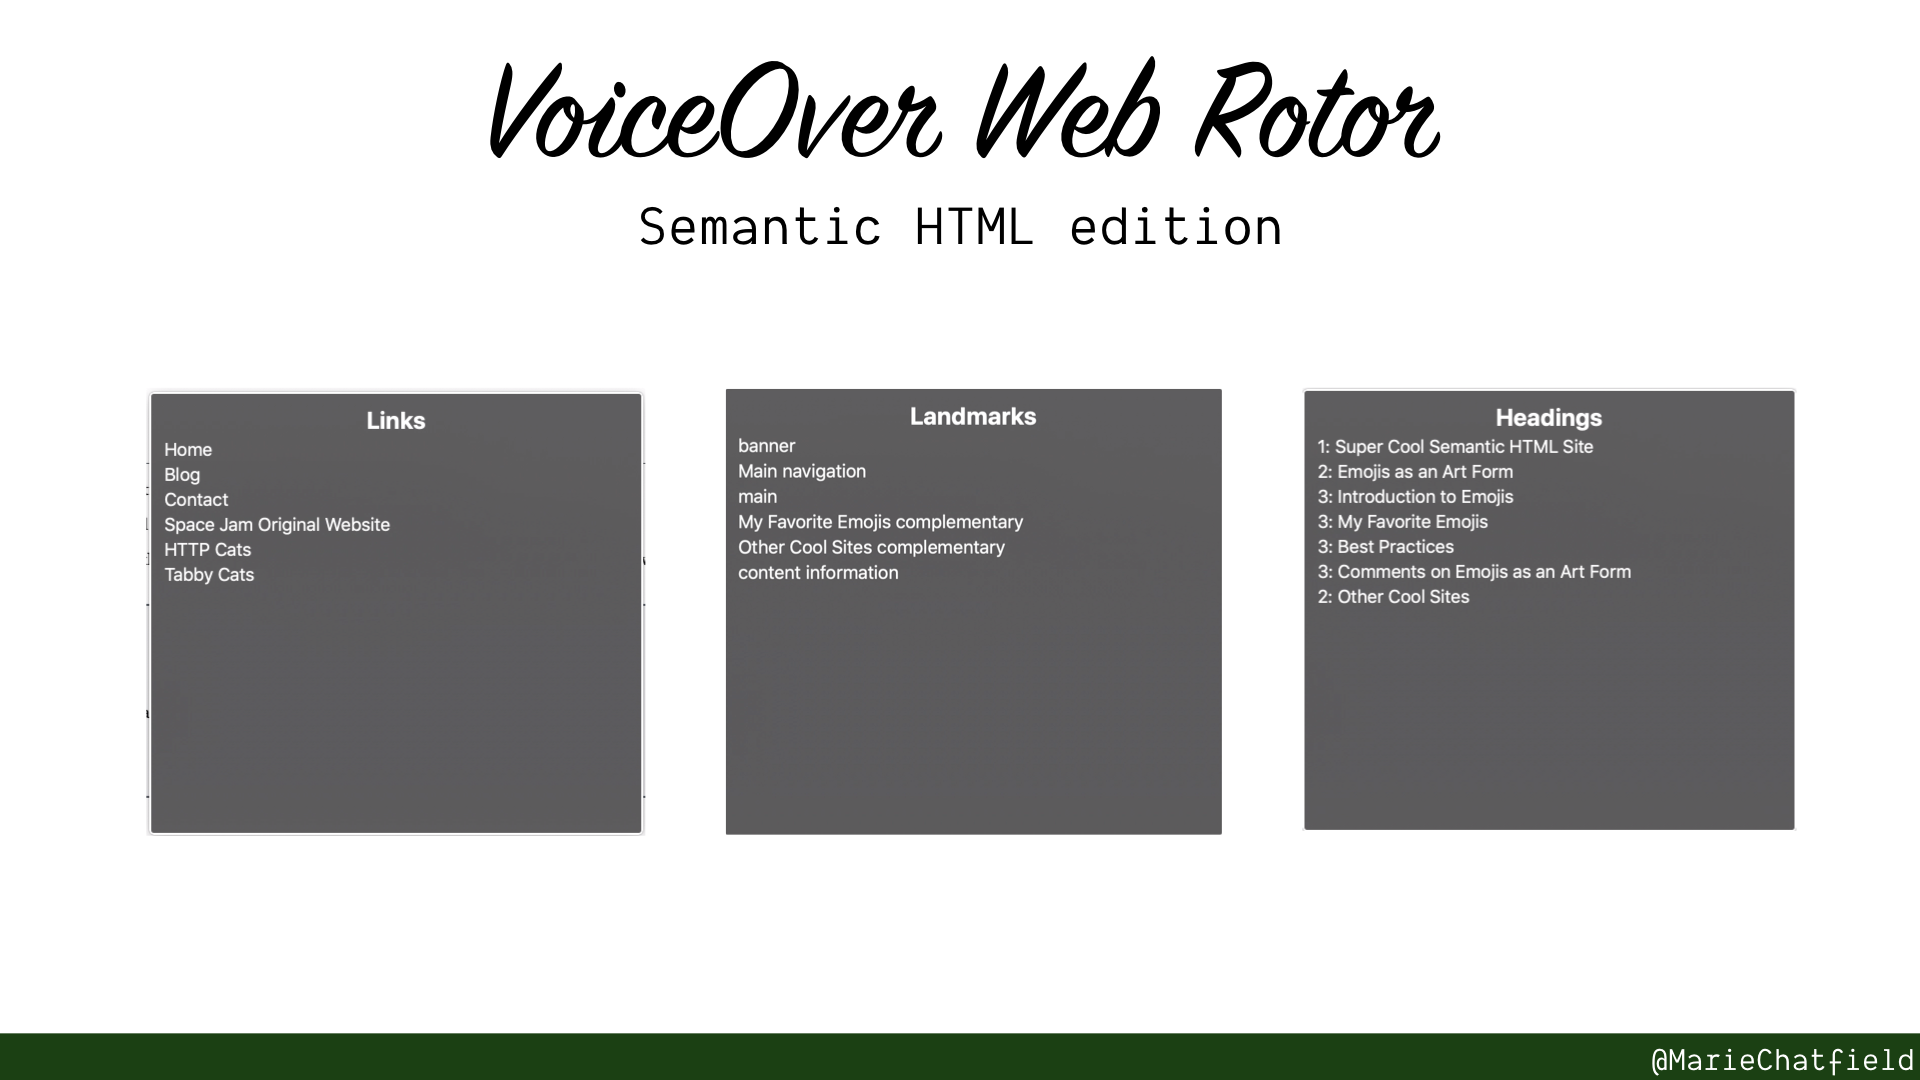 Slide showing VoiceOver Web Rotor for semantic HTML version